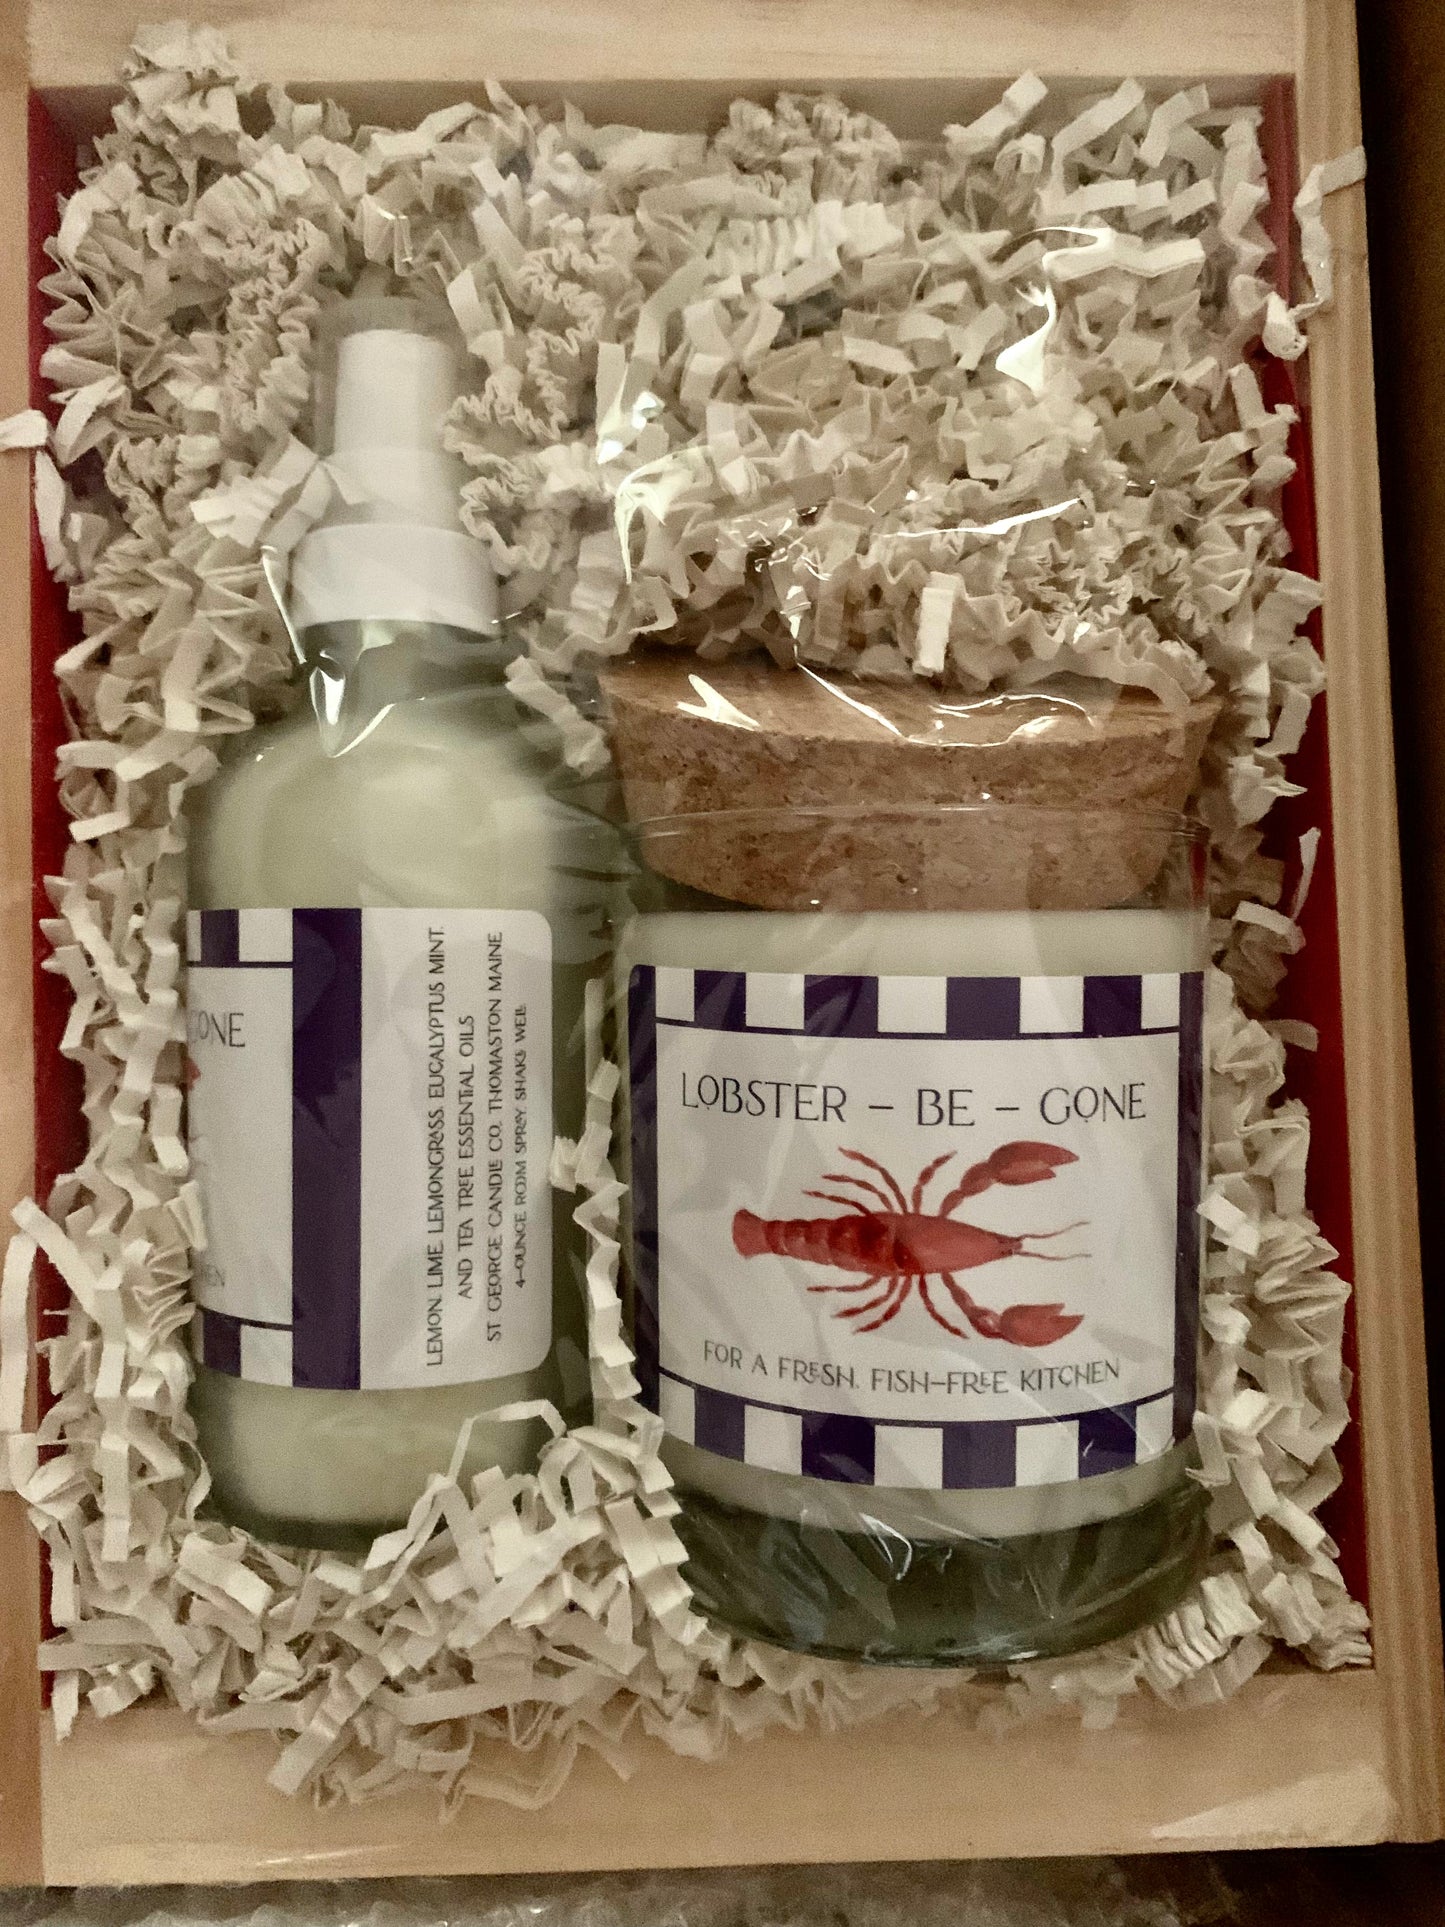 St. George Candle Co Lobster Be Gone Gift Set